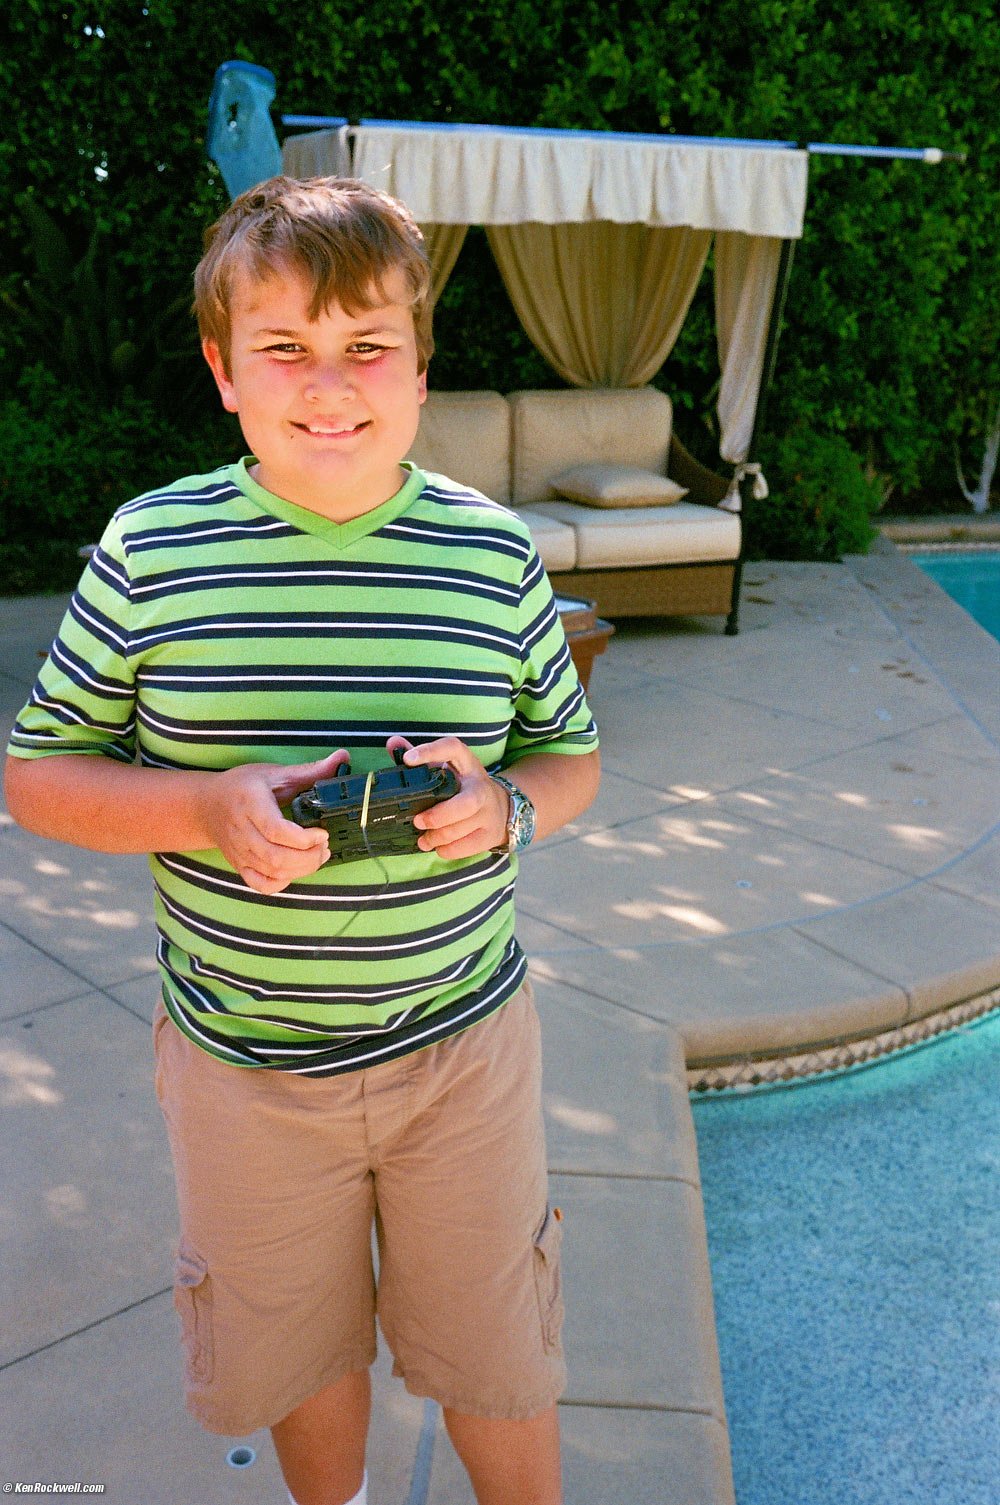 Ryan by the pool with the remote control transmitter for his boat.